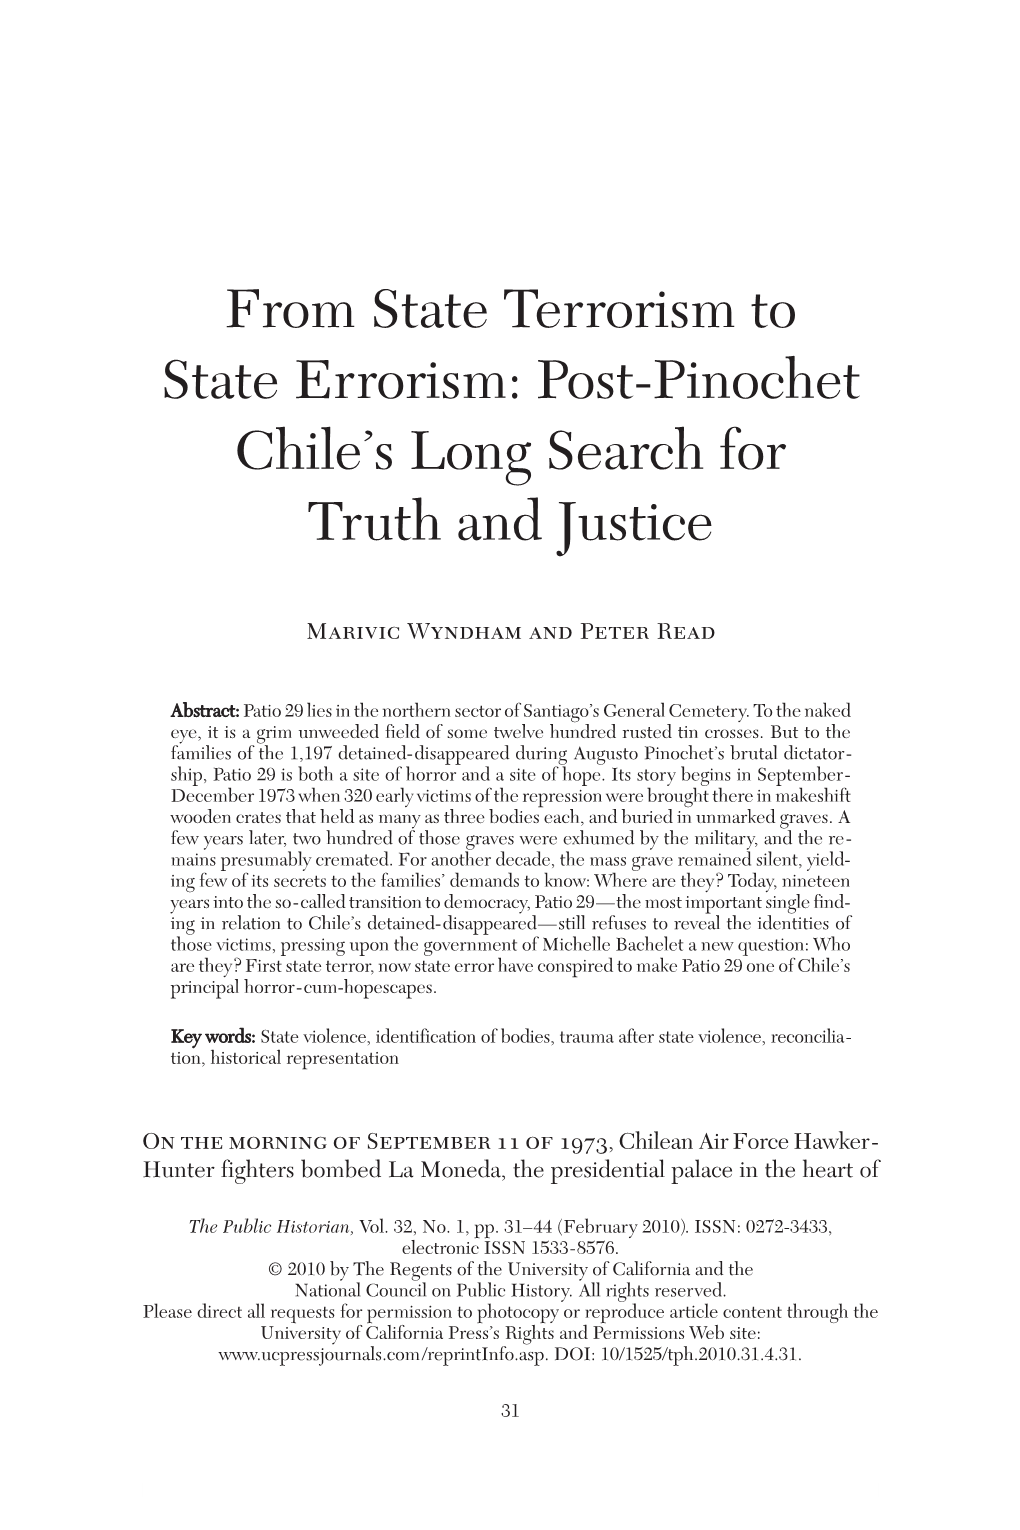 From State Terrorism to State Errorism: Post-Pinochet Chile's Long Search